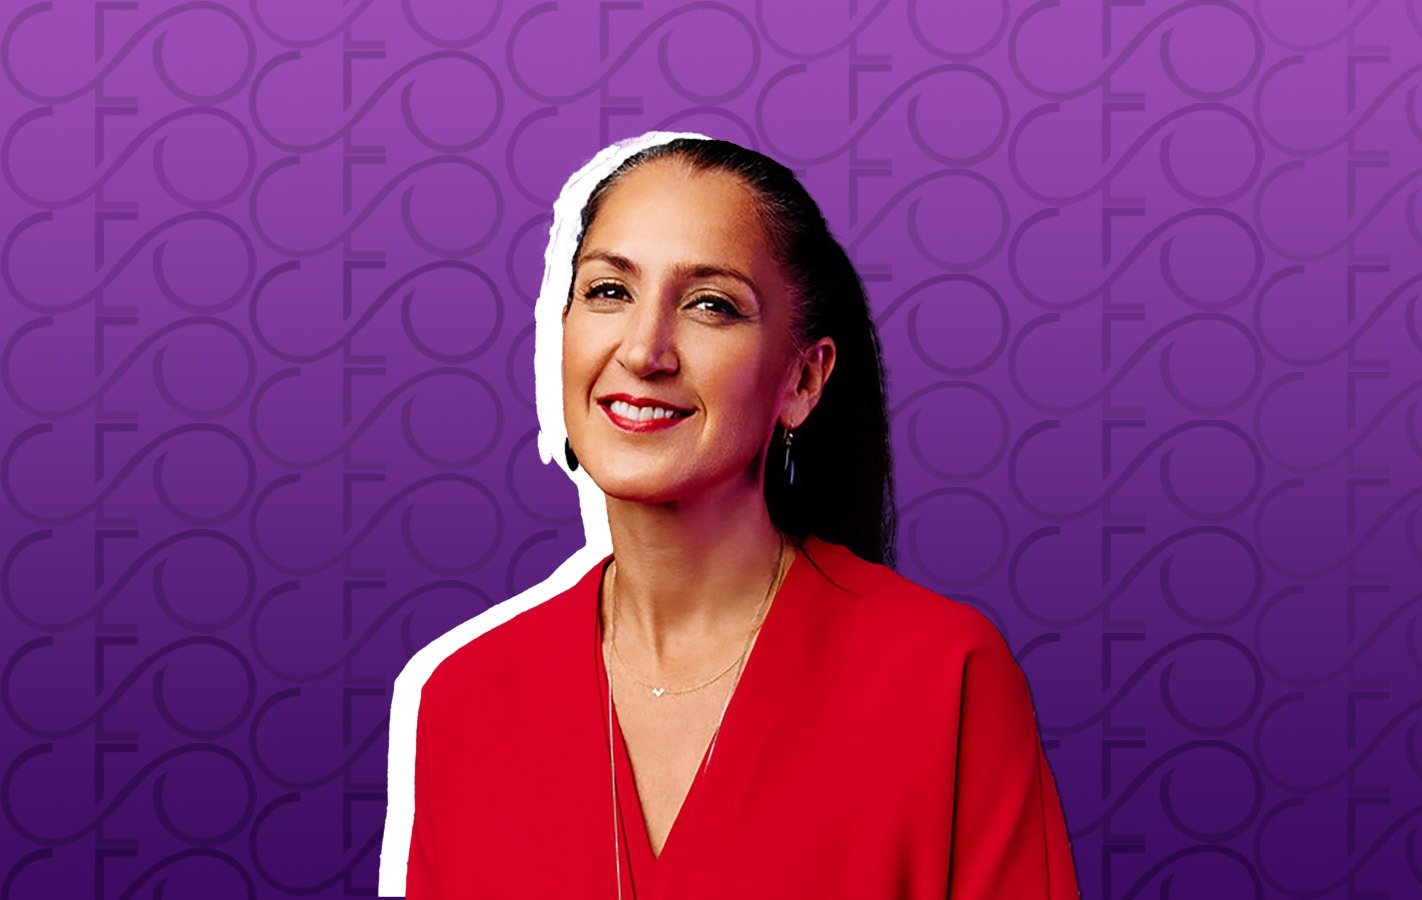 Liza Landsman's journey as the CEO of Stash